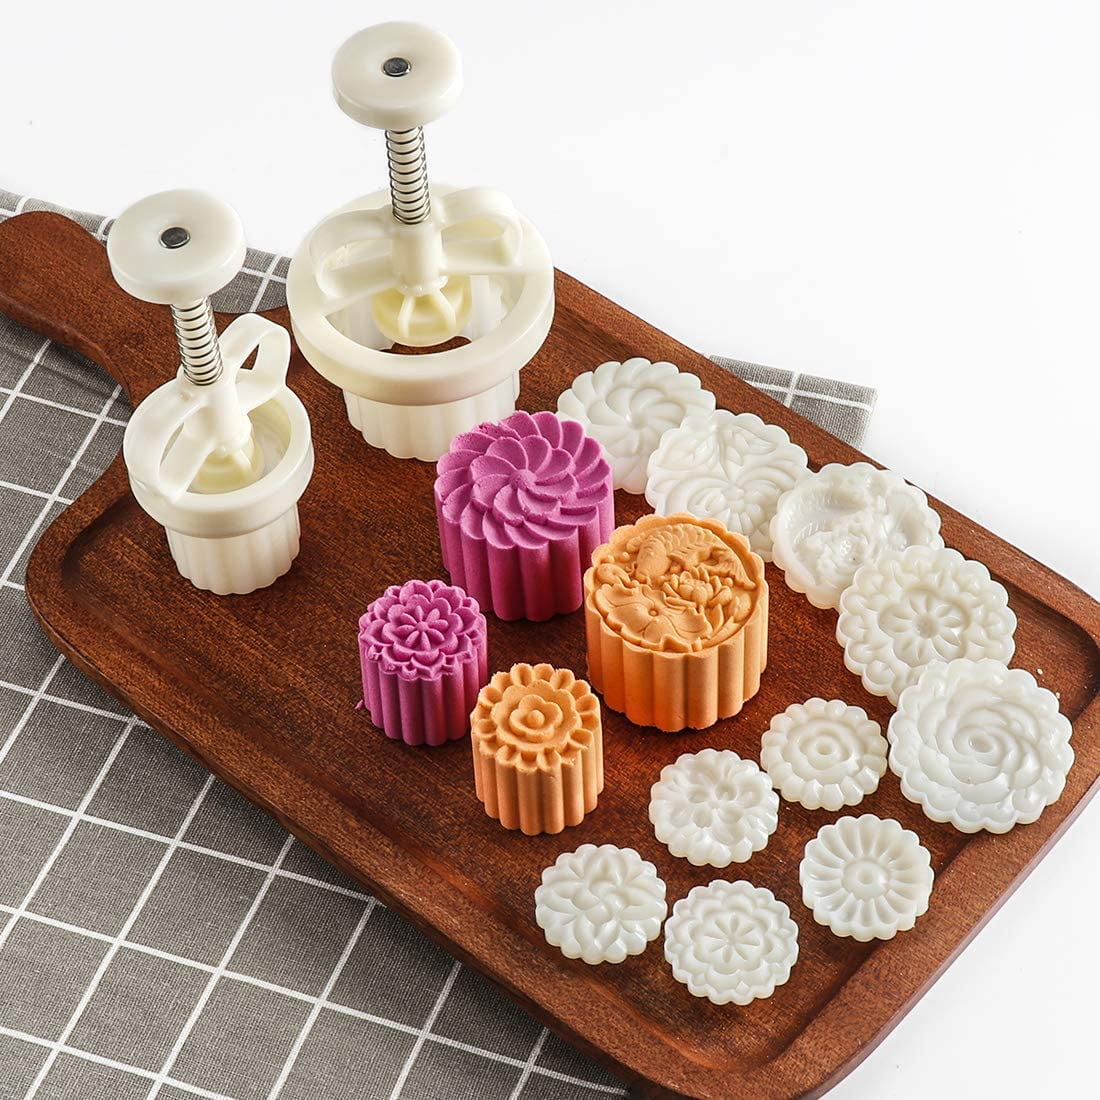 VOVOV Mid-Autumn Festival Hand-Pressure Moon Cake Mould With 12 Pcs Mode Pattern For 4 Sets 